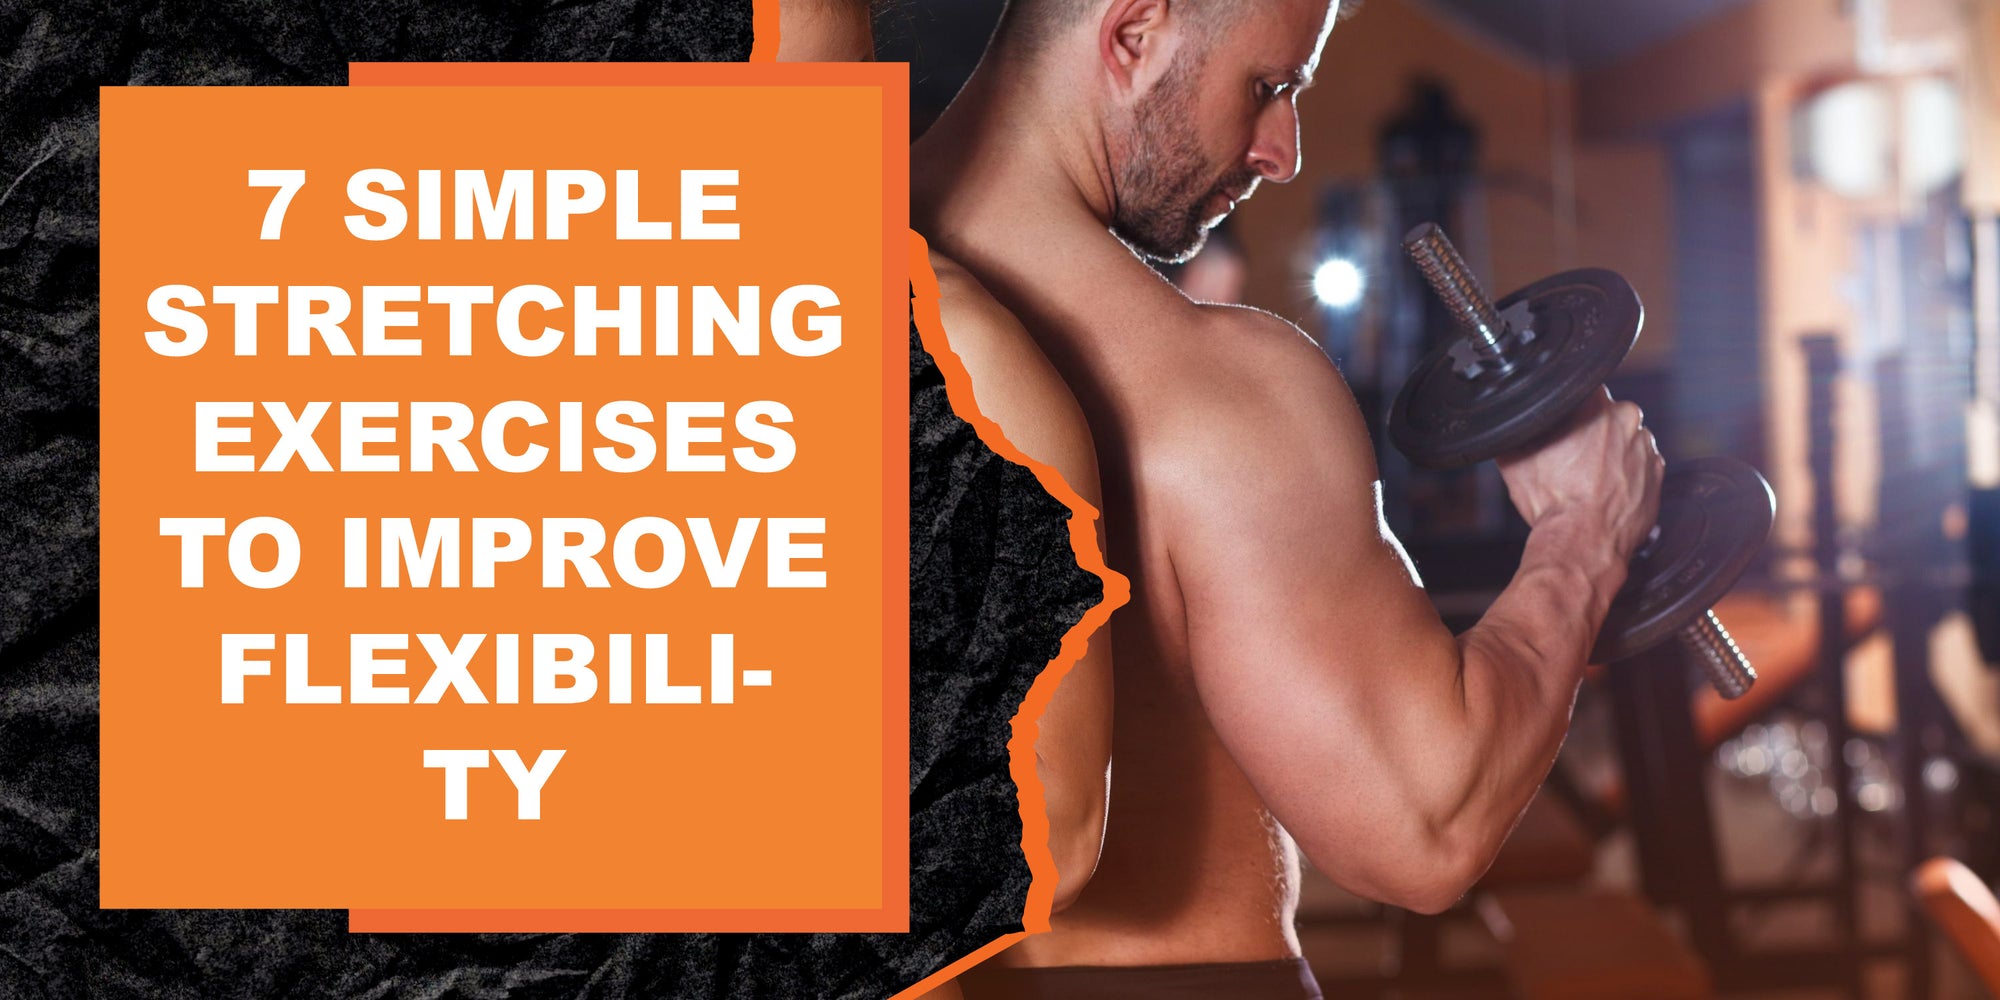 7 Simple Stretching Exercises to Improve Flexibility